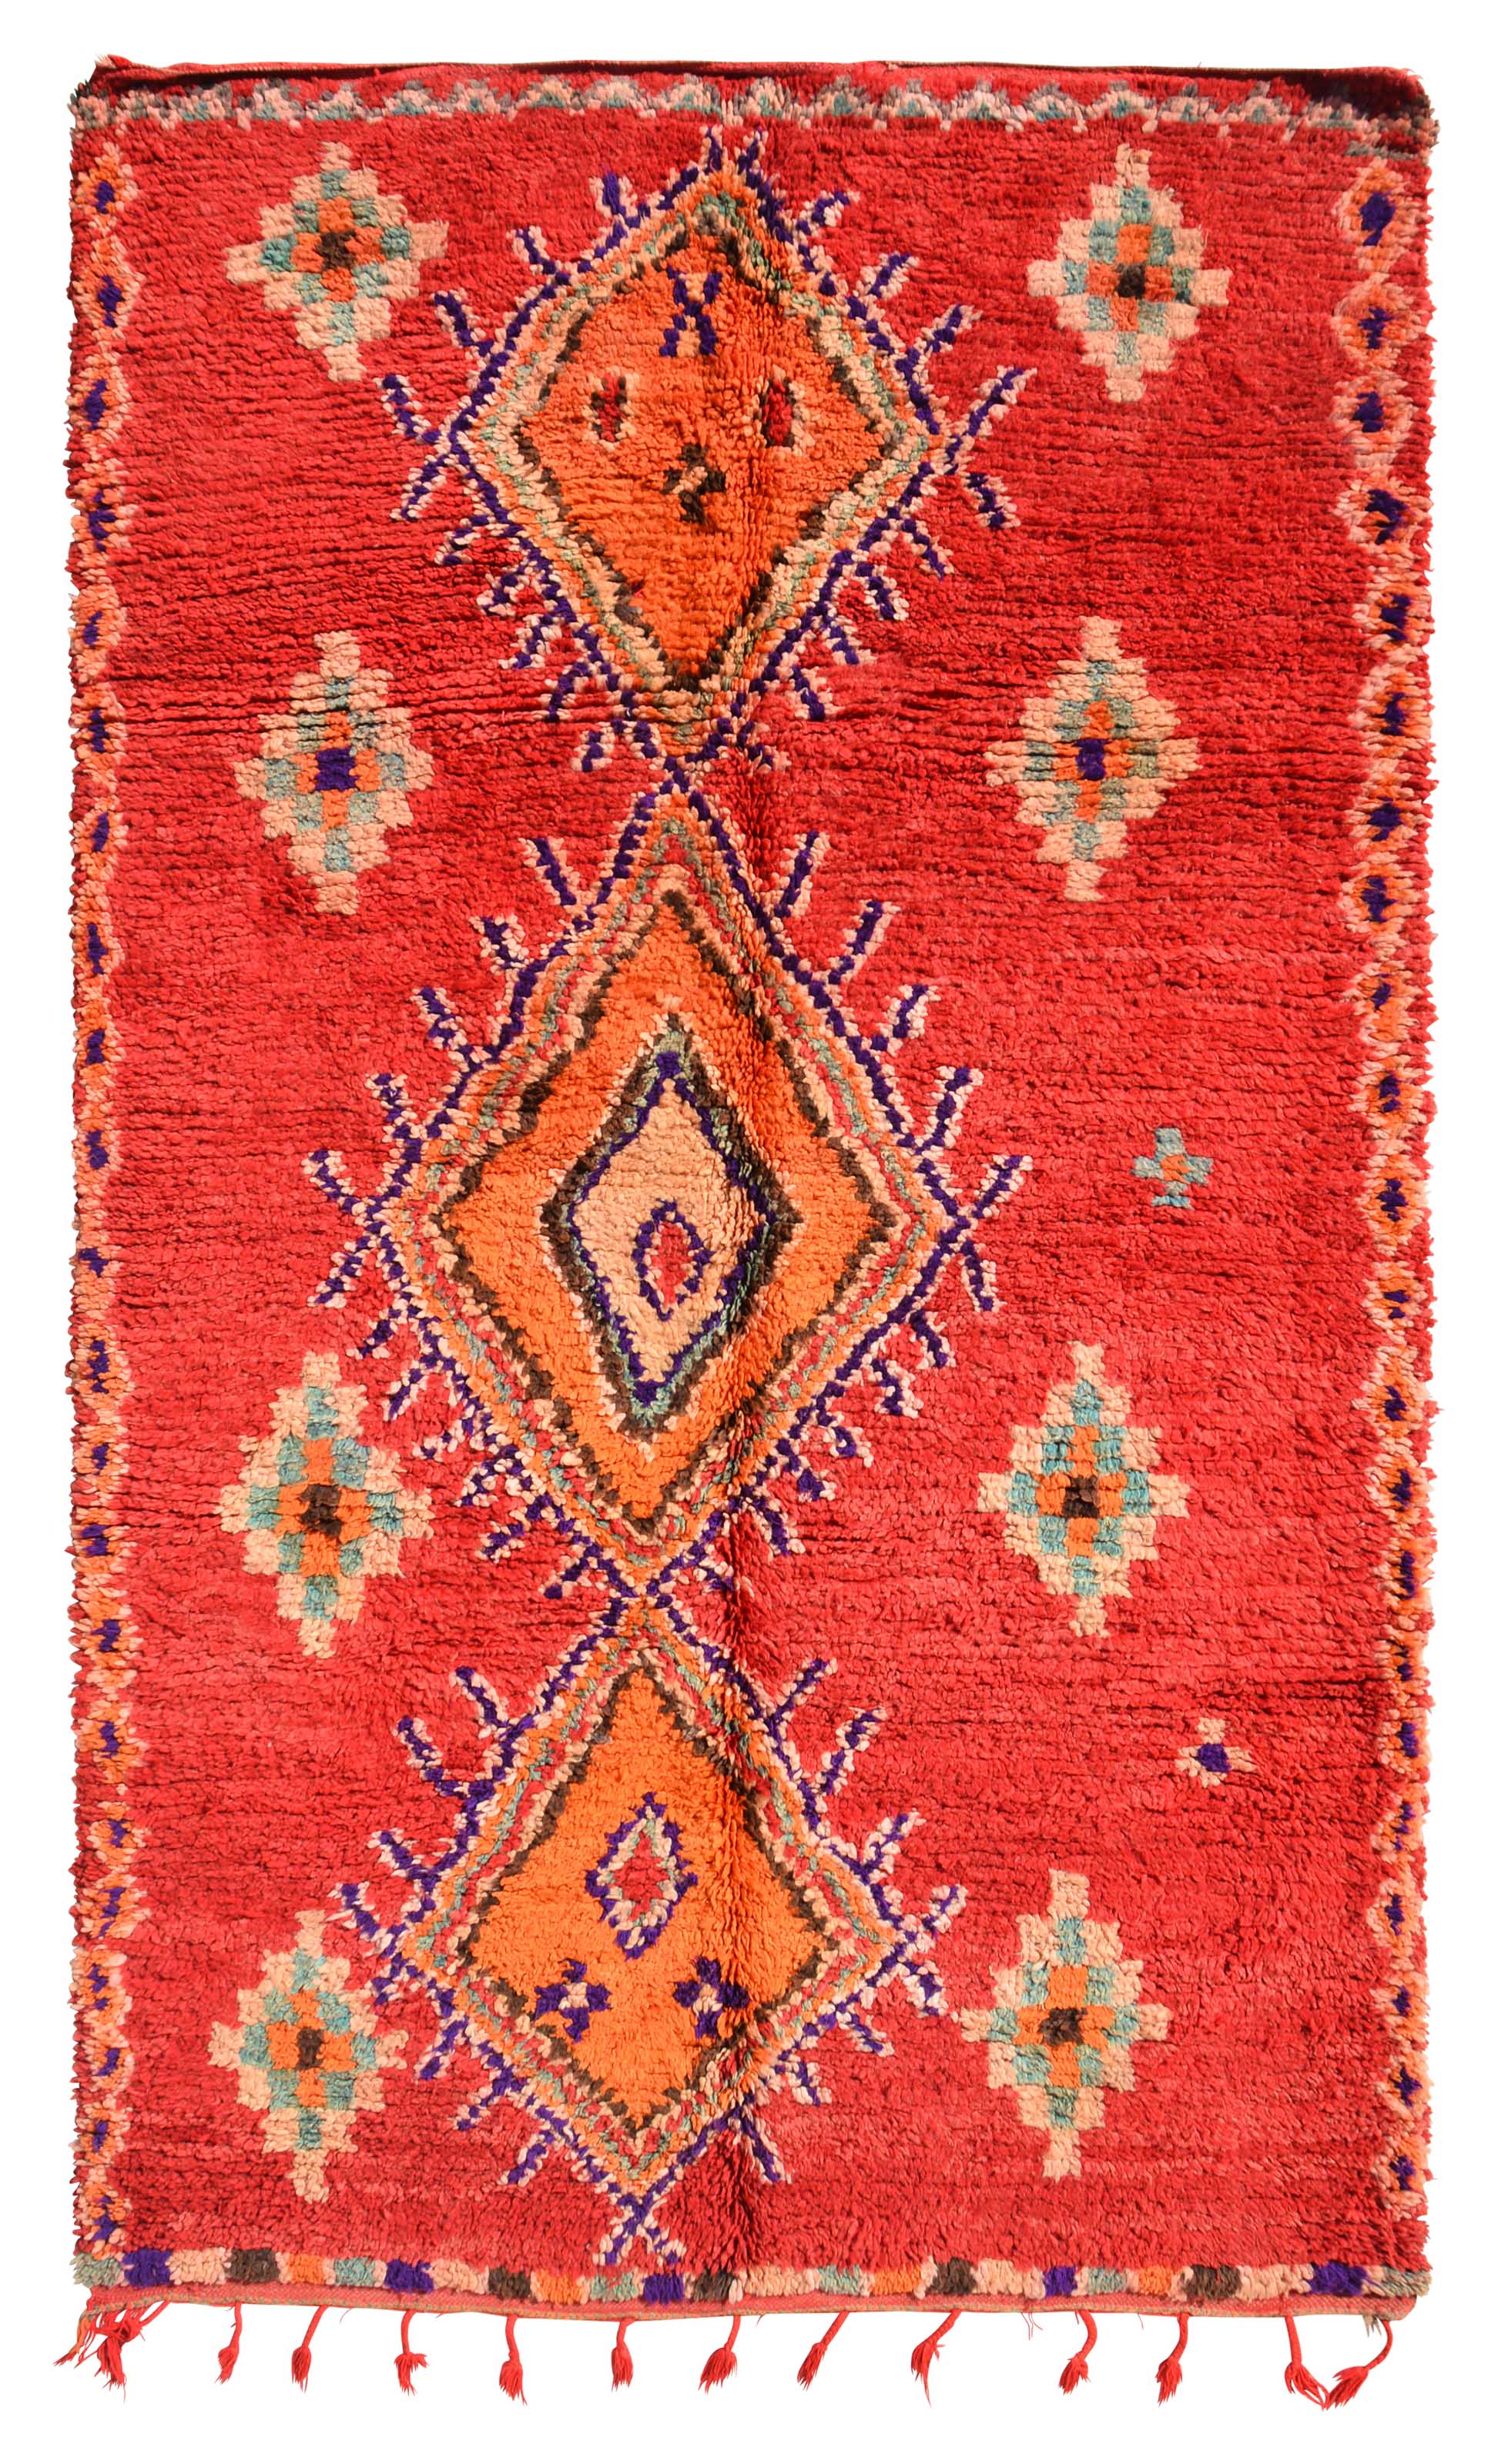 Vintage Moroccan Rug Vintage Inspired Rugs - Red And Pink Rug - Illuminate Collective illuminate collective